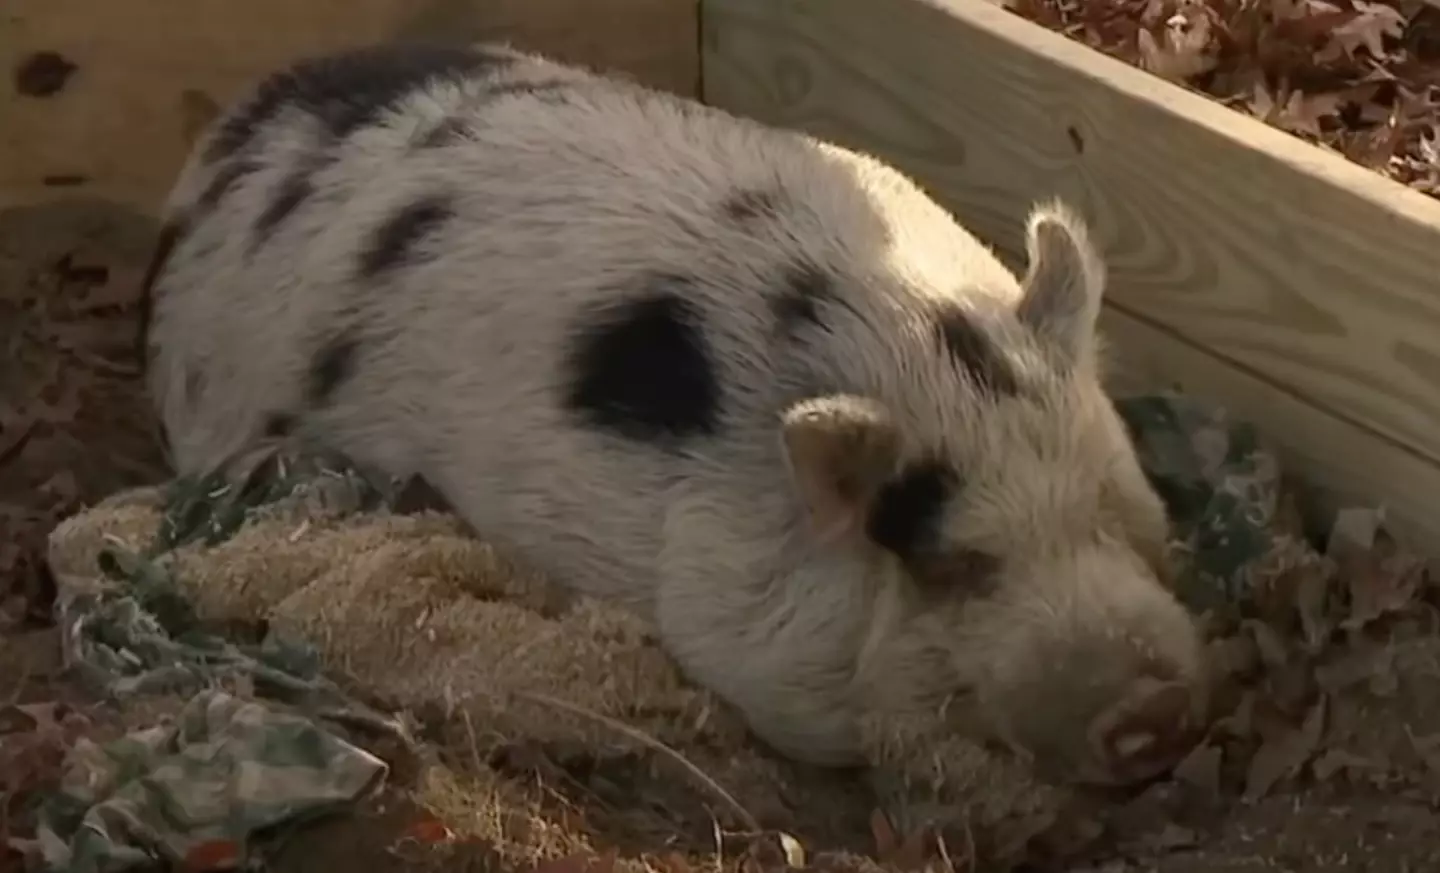 Chelsea Rumbaugh brought the cheekily named pig home to her farm on October 13.